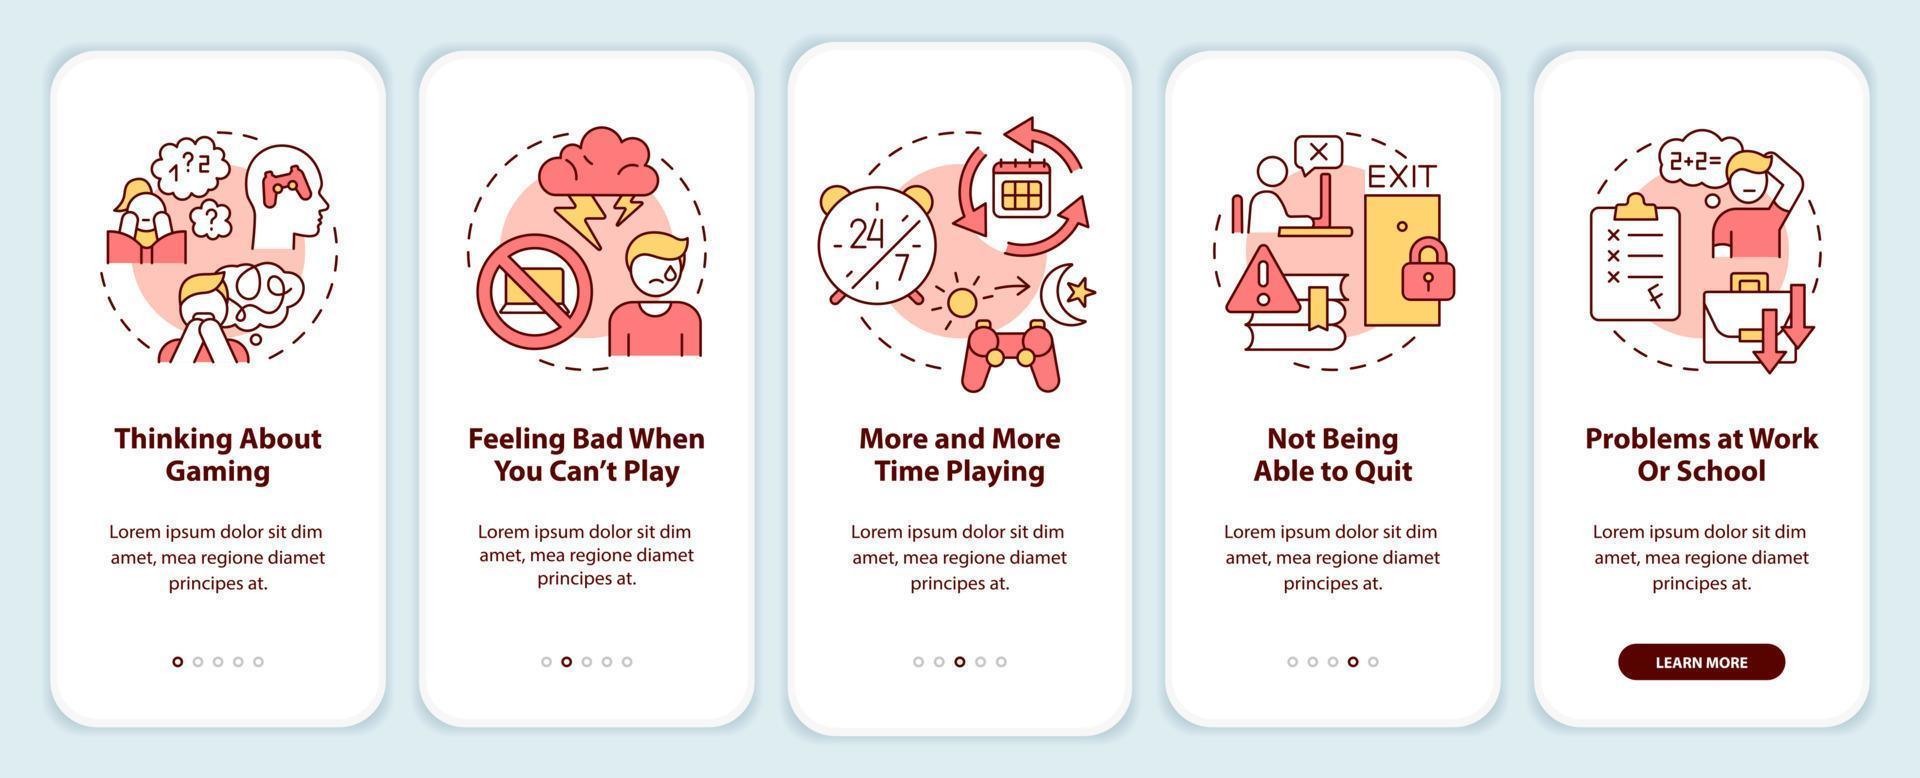 Signs of game addiction onboarding mobile app screen. Mental health walkthrough 5 steps graphic instructions pages with linear concepts. UI, UX, GUI template. vector